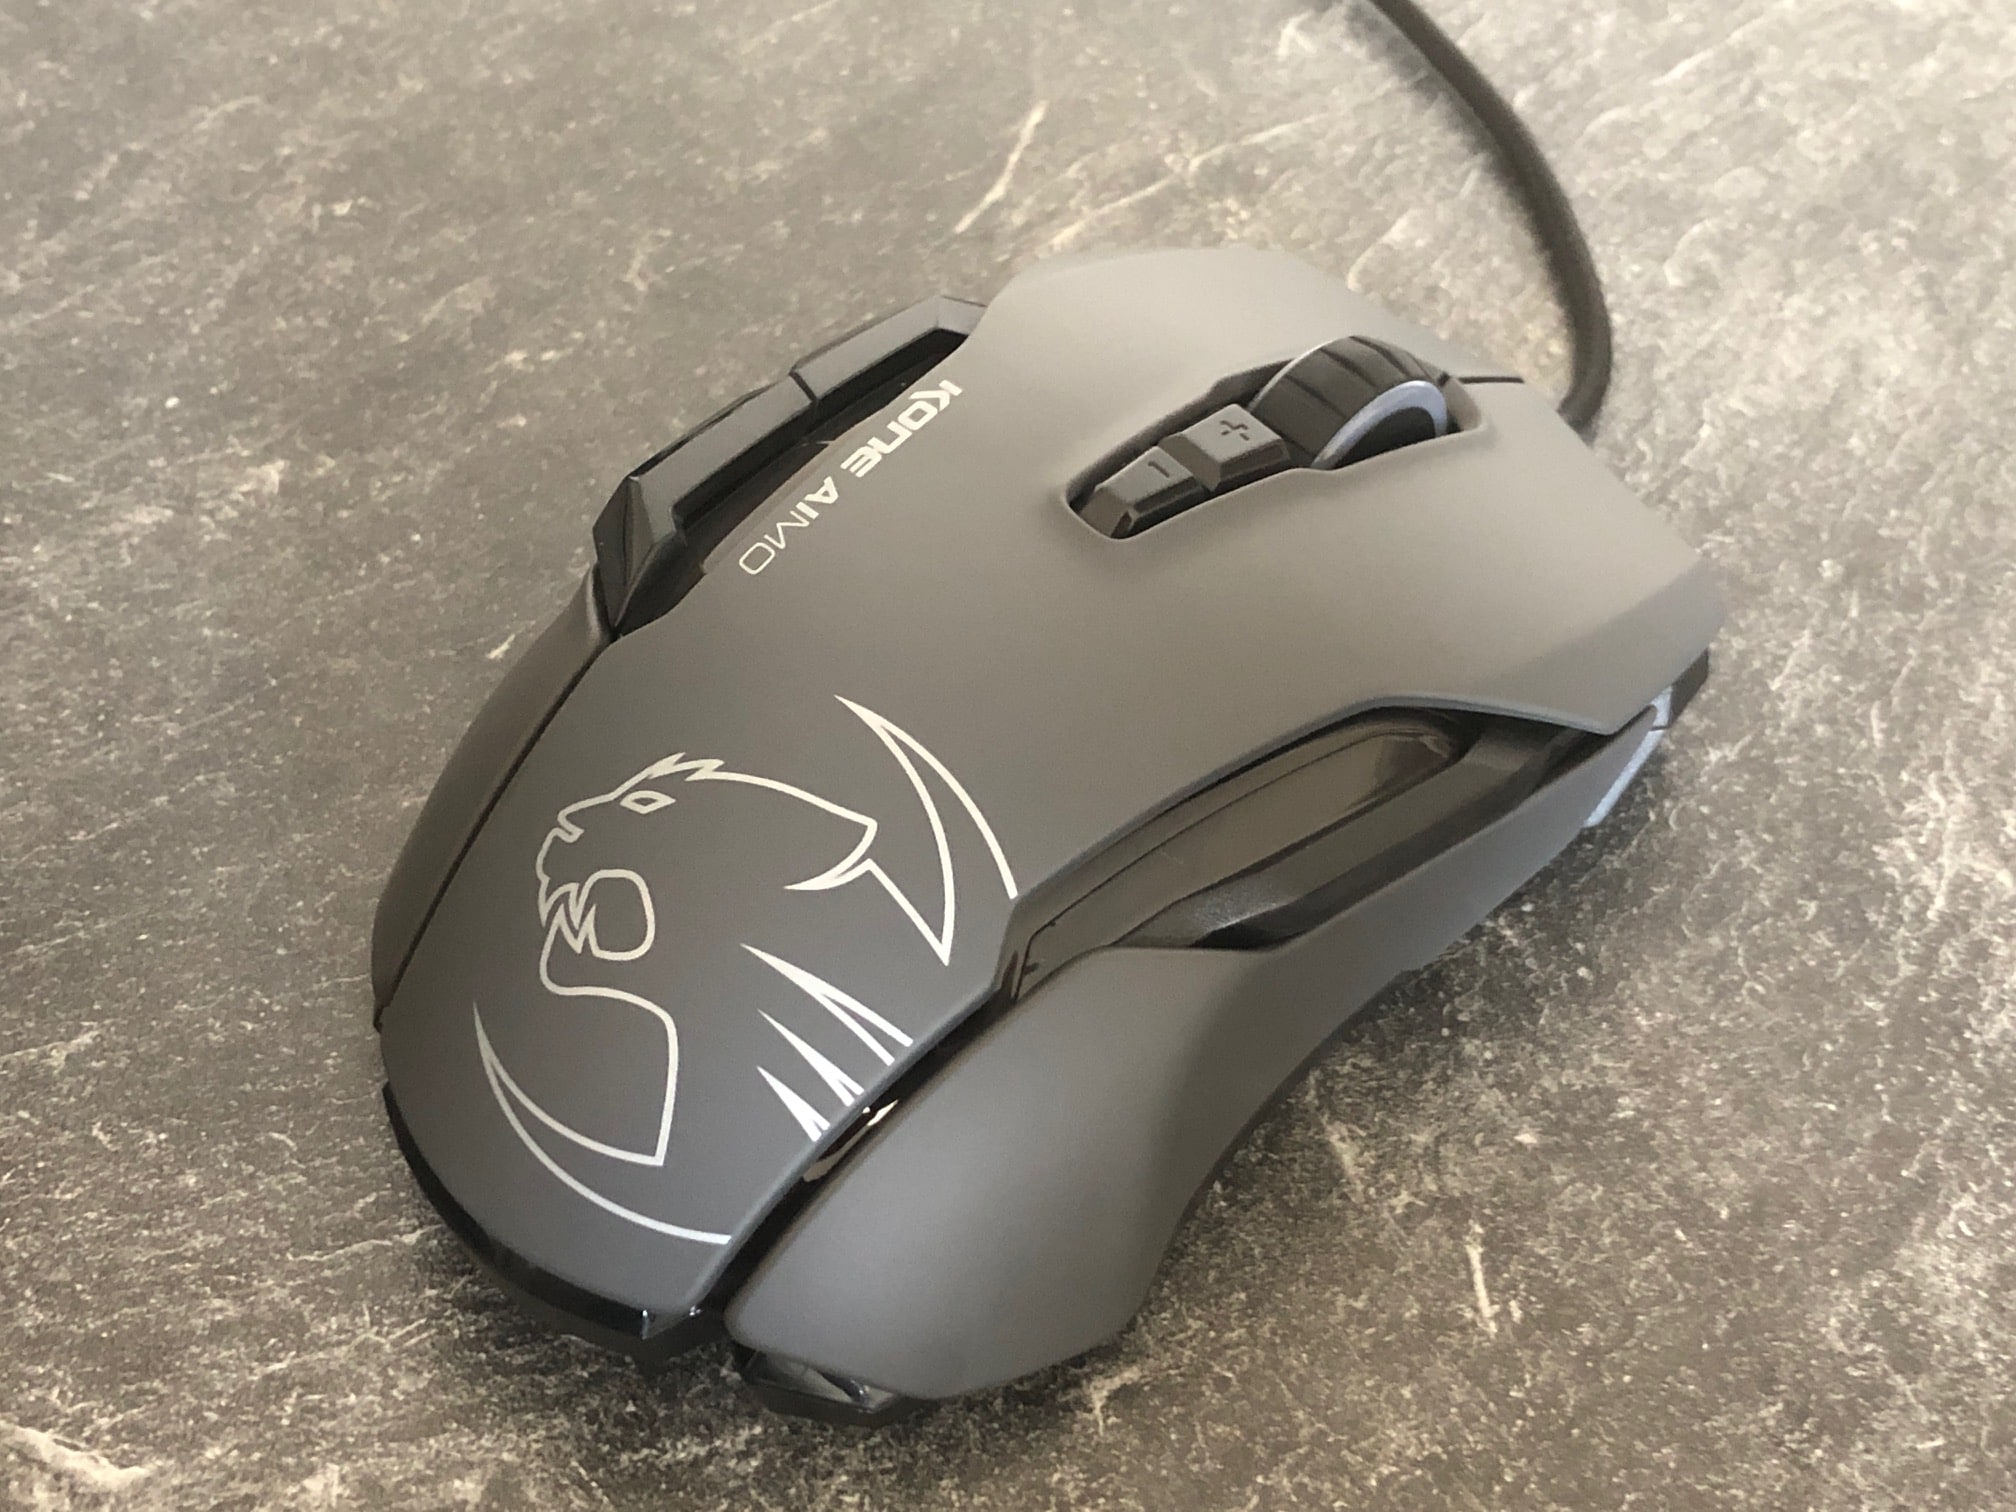 ROCCAT Kone AIMO Review - Introduction